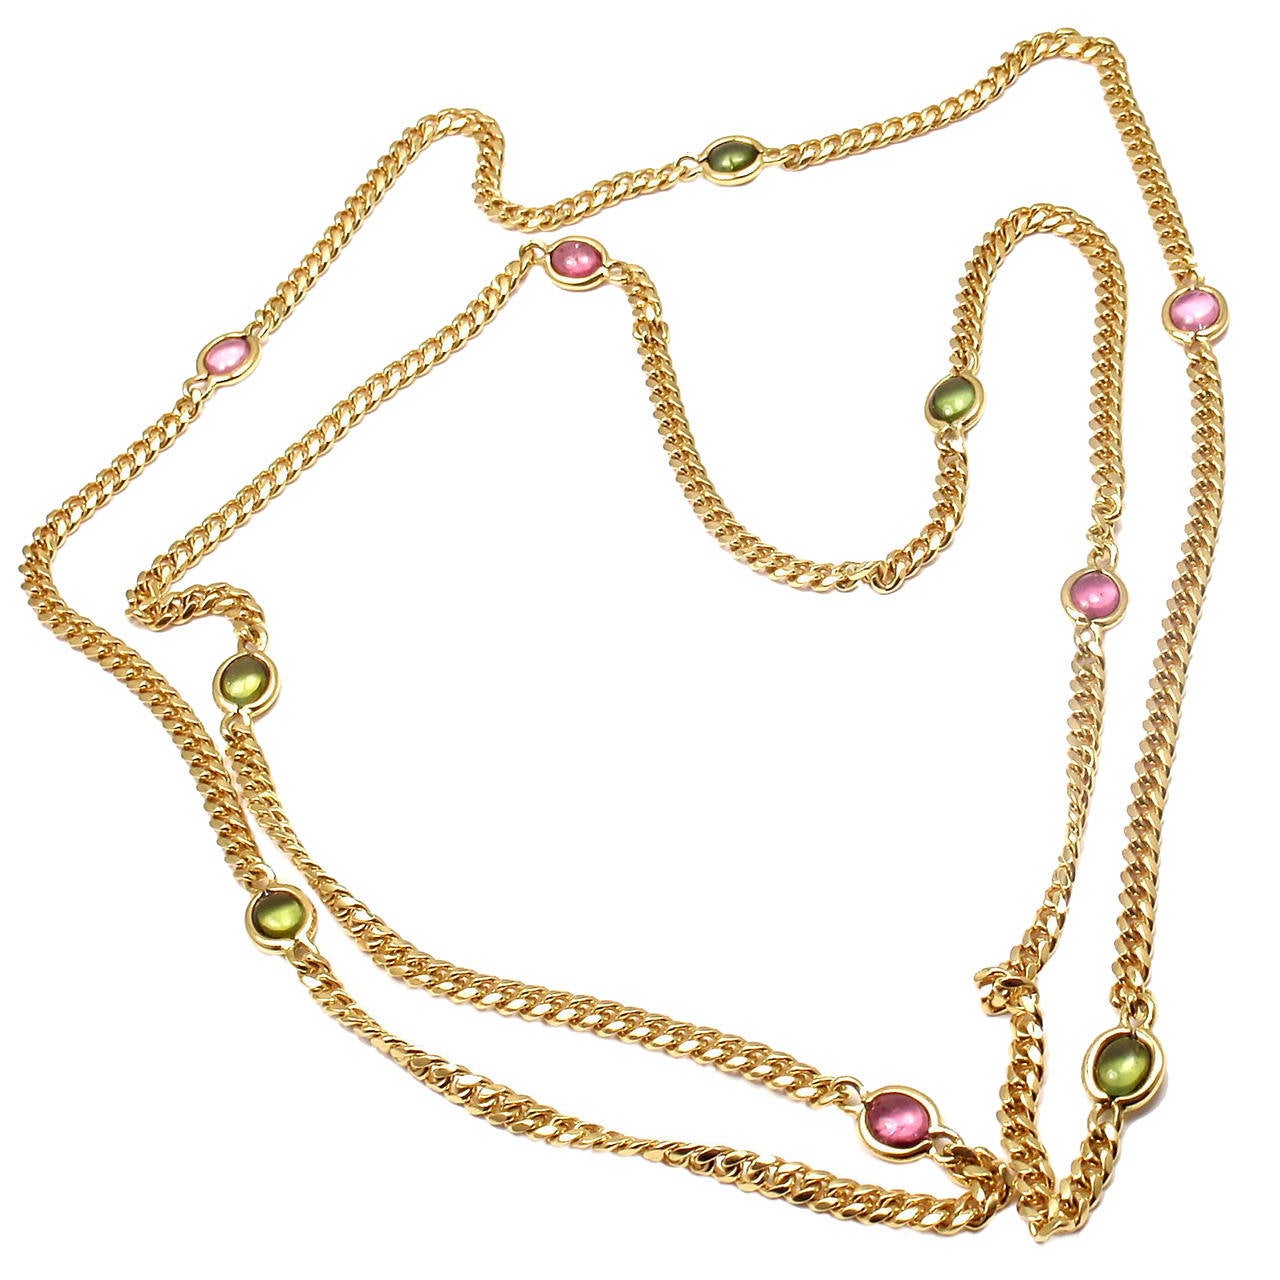 Tiffany & Co. Pink and Green Tourmaline Gold 35 Inch Link Necklace